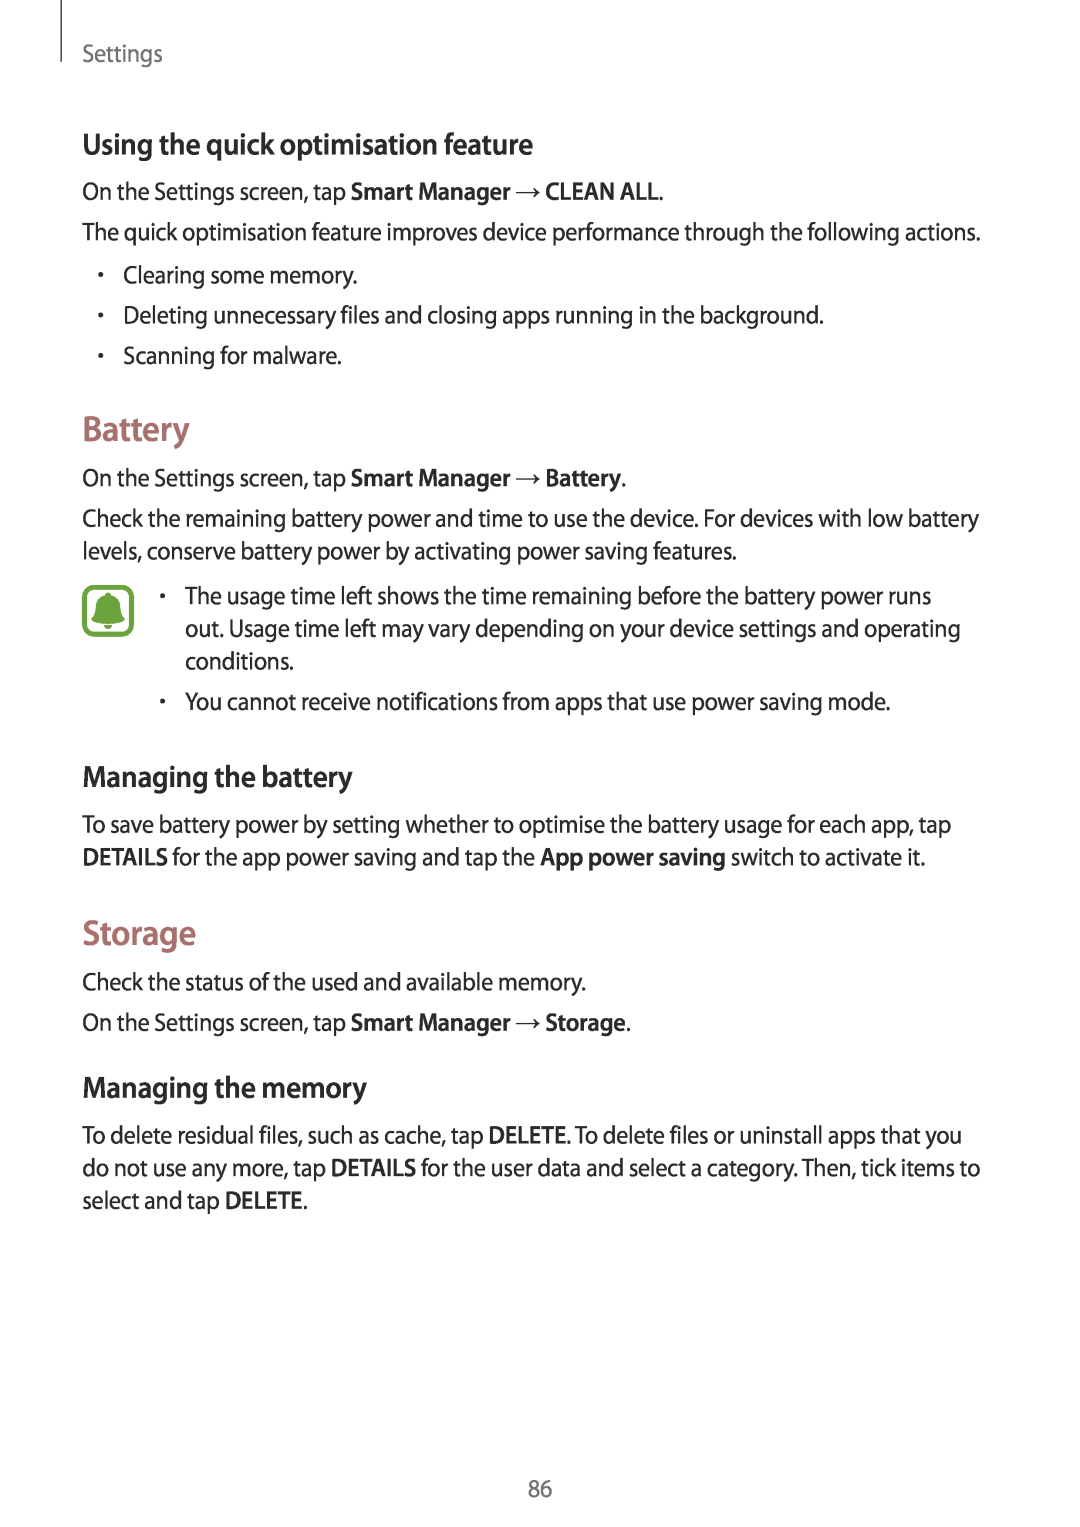 Samsung SM-T819NZWEEUR Battery, Storage, Using the quick optimisation feature, Managing the battery, Managing the memory 